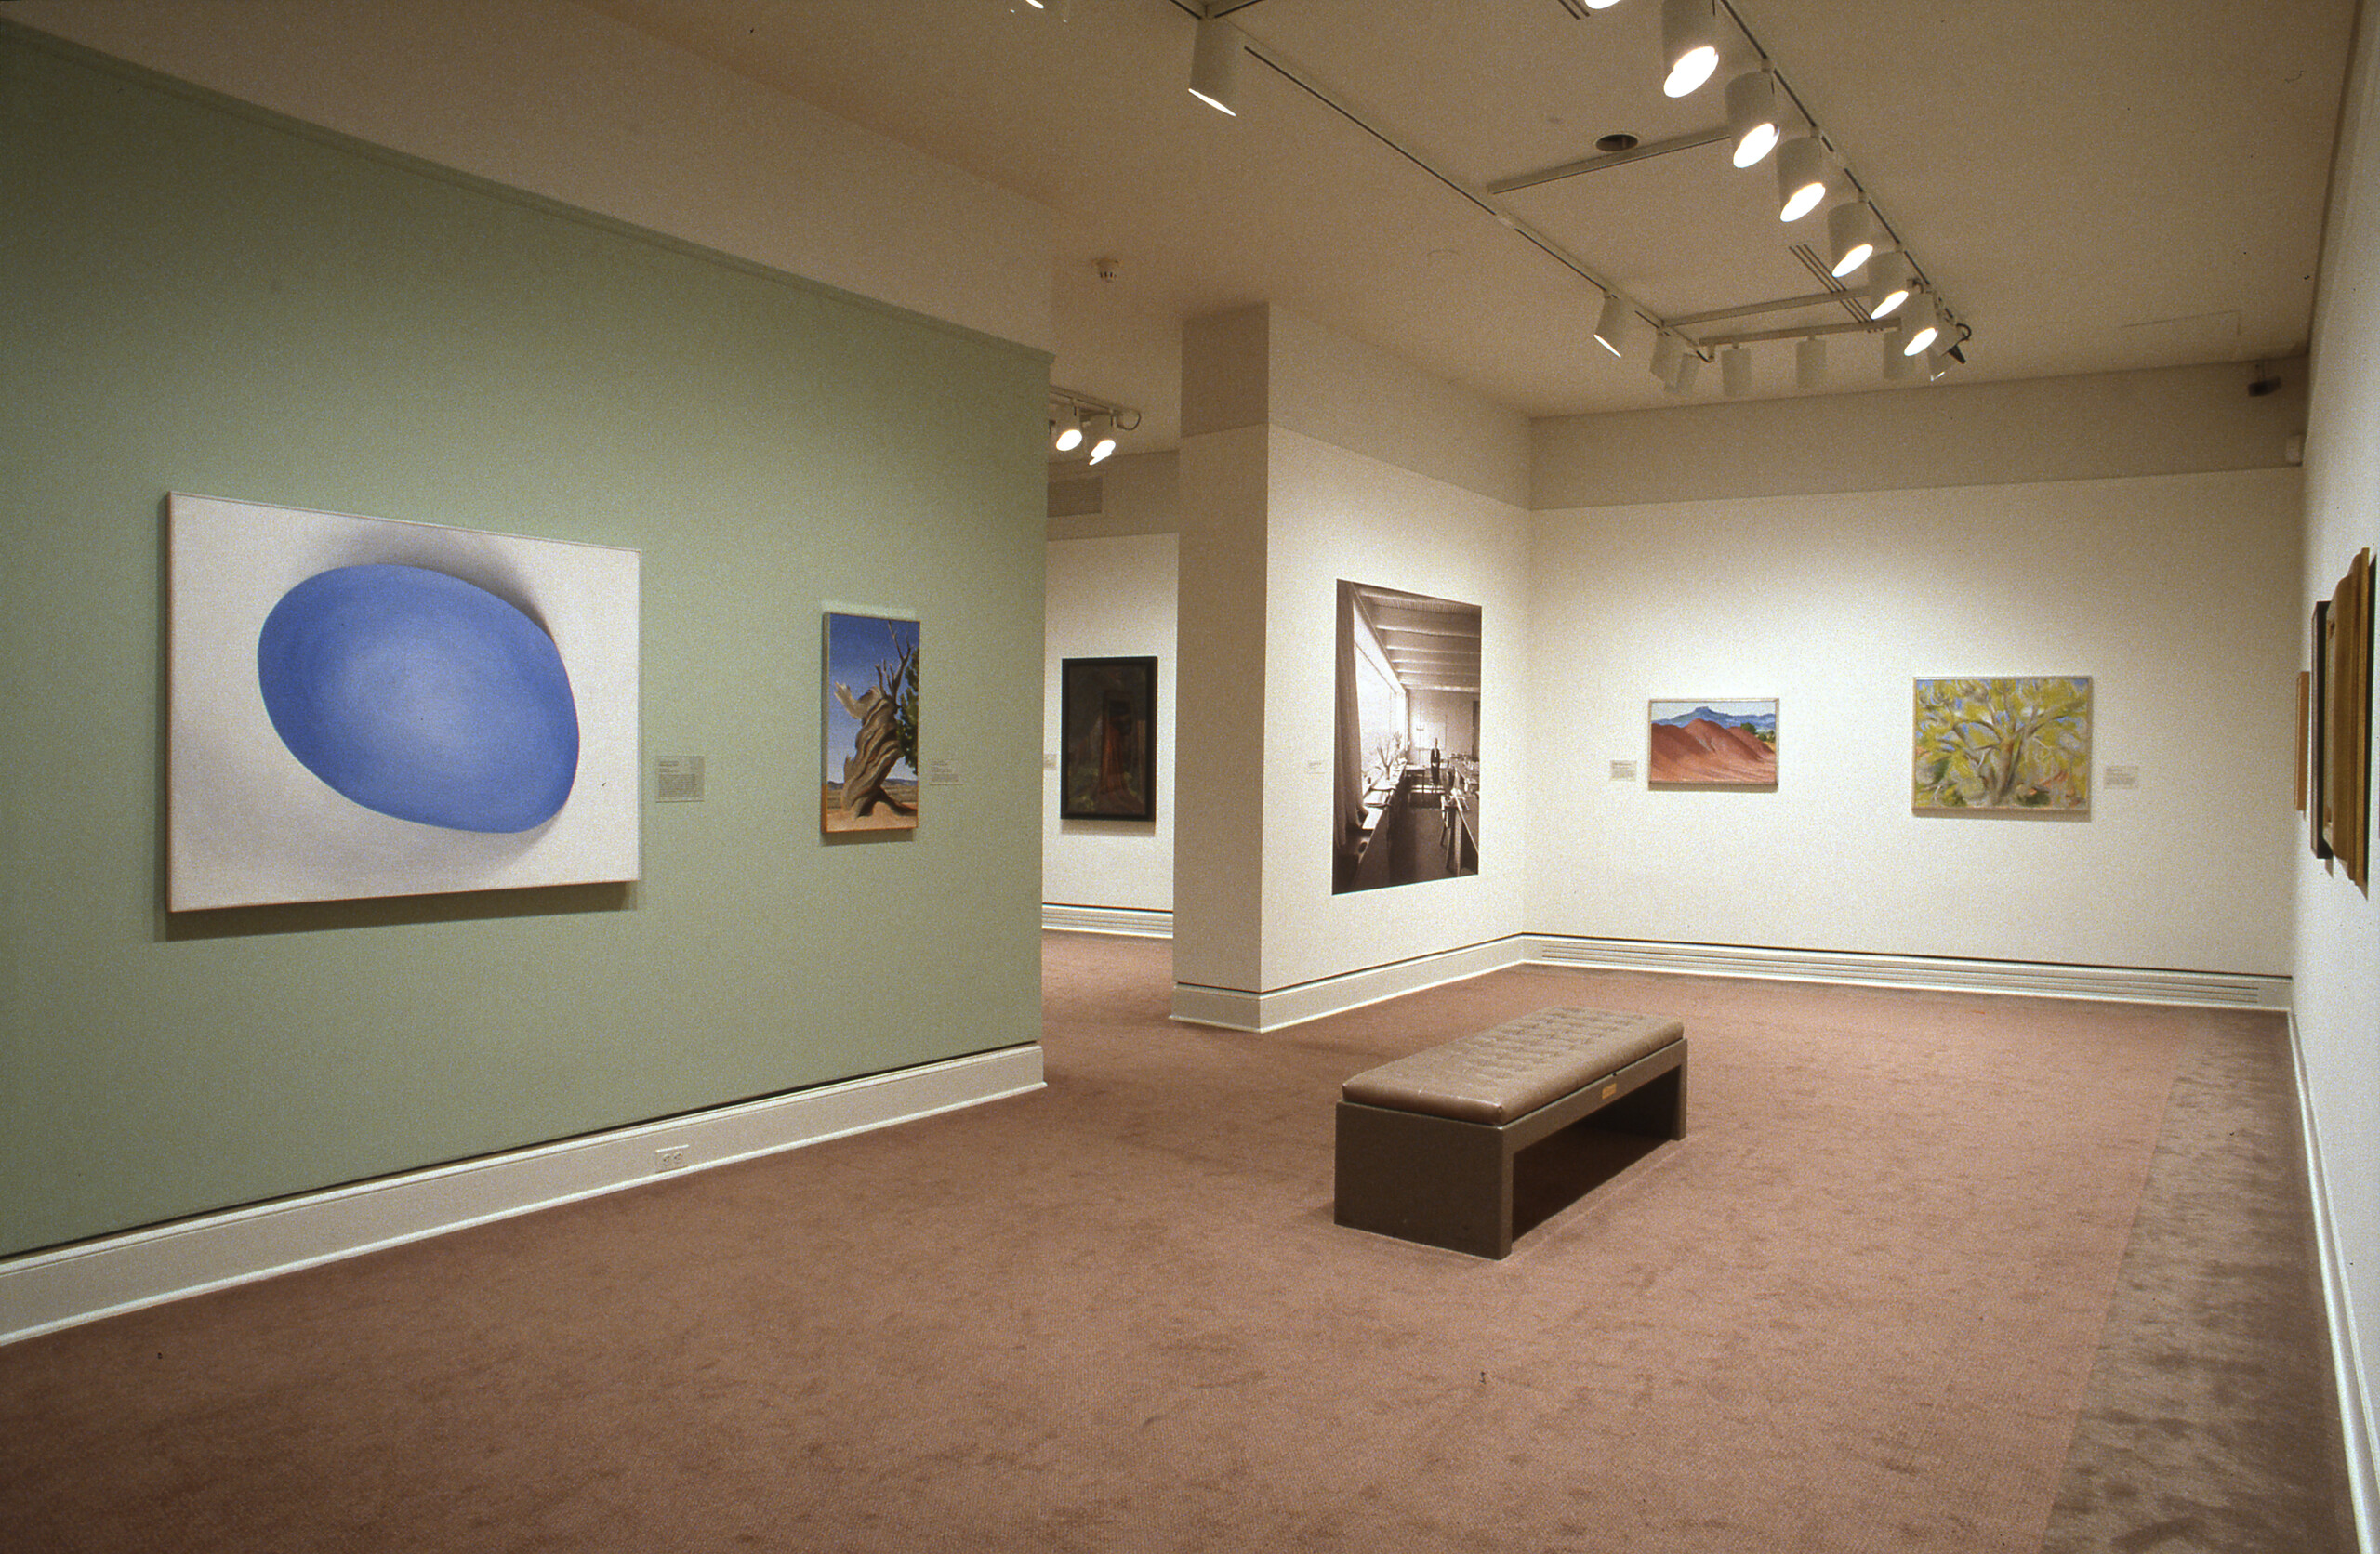 An installation image of an exhibition space with several paintings hung on walls. The paintings to the left are hanging on a sage green wall.